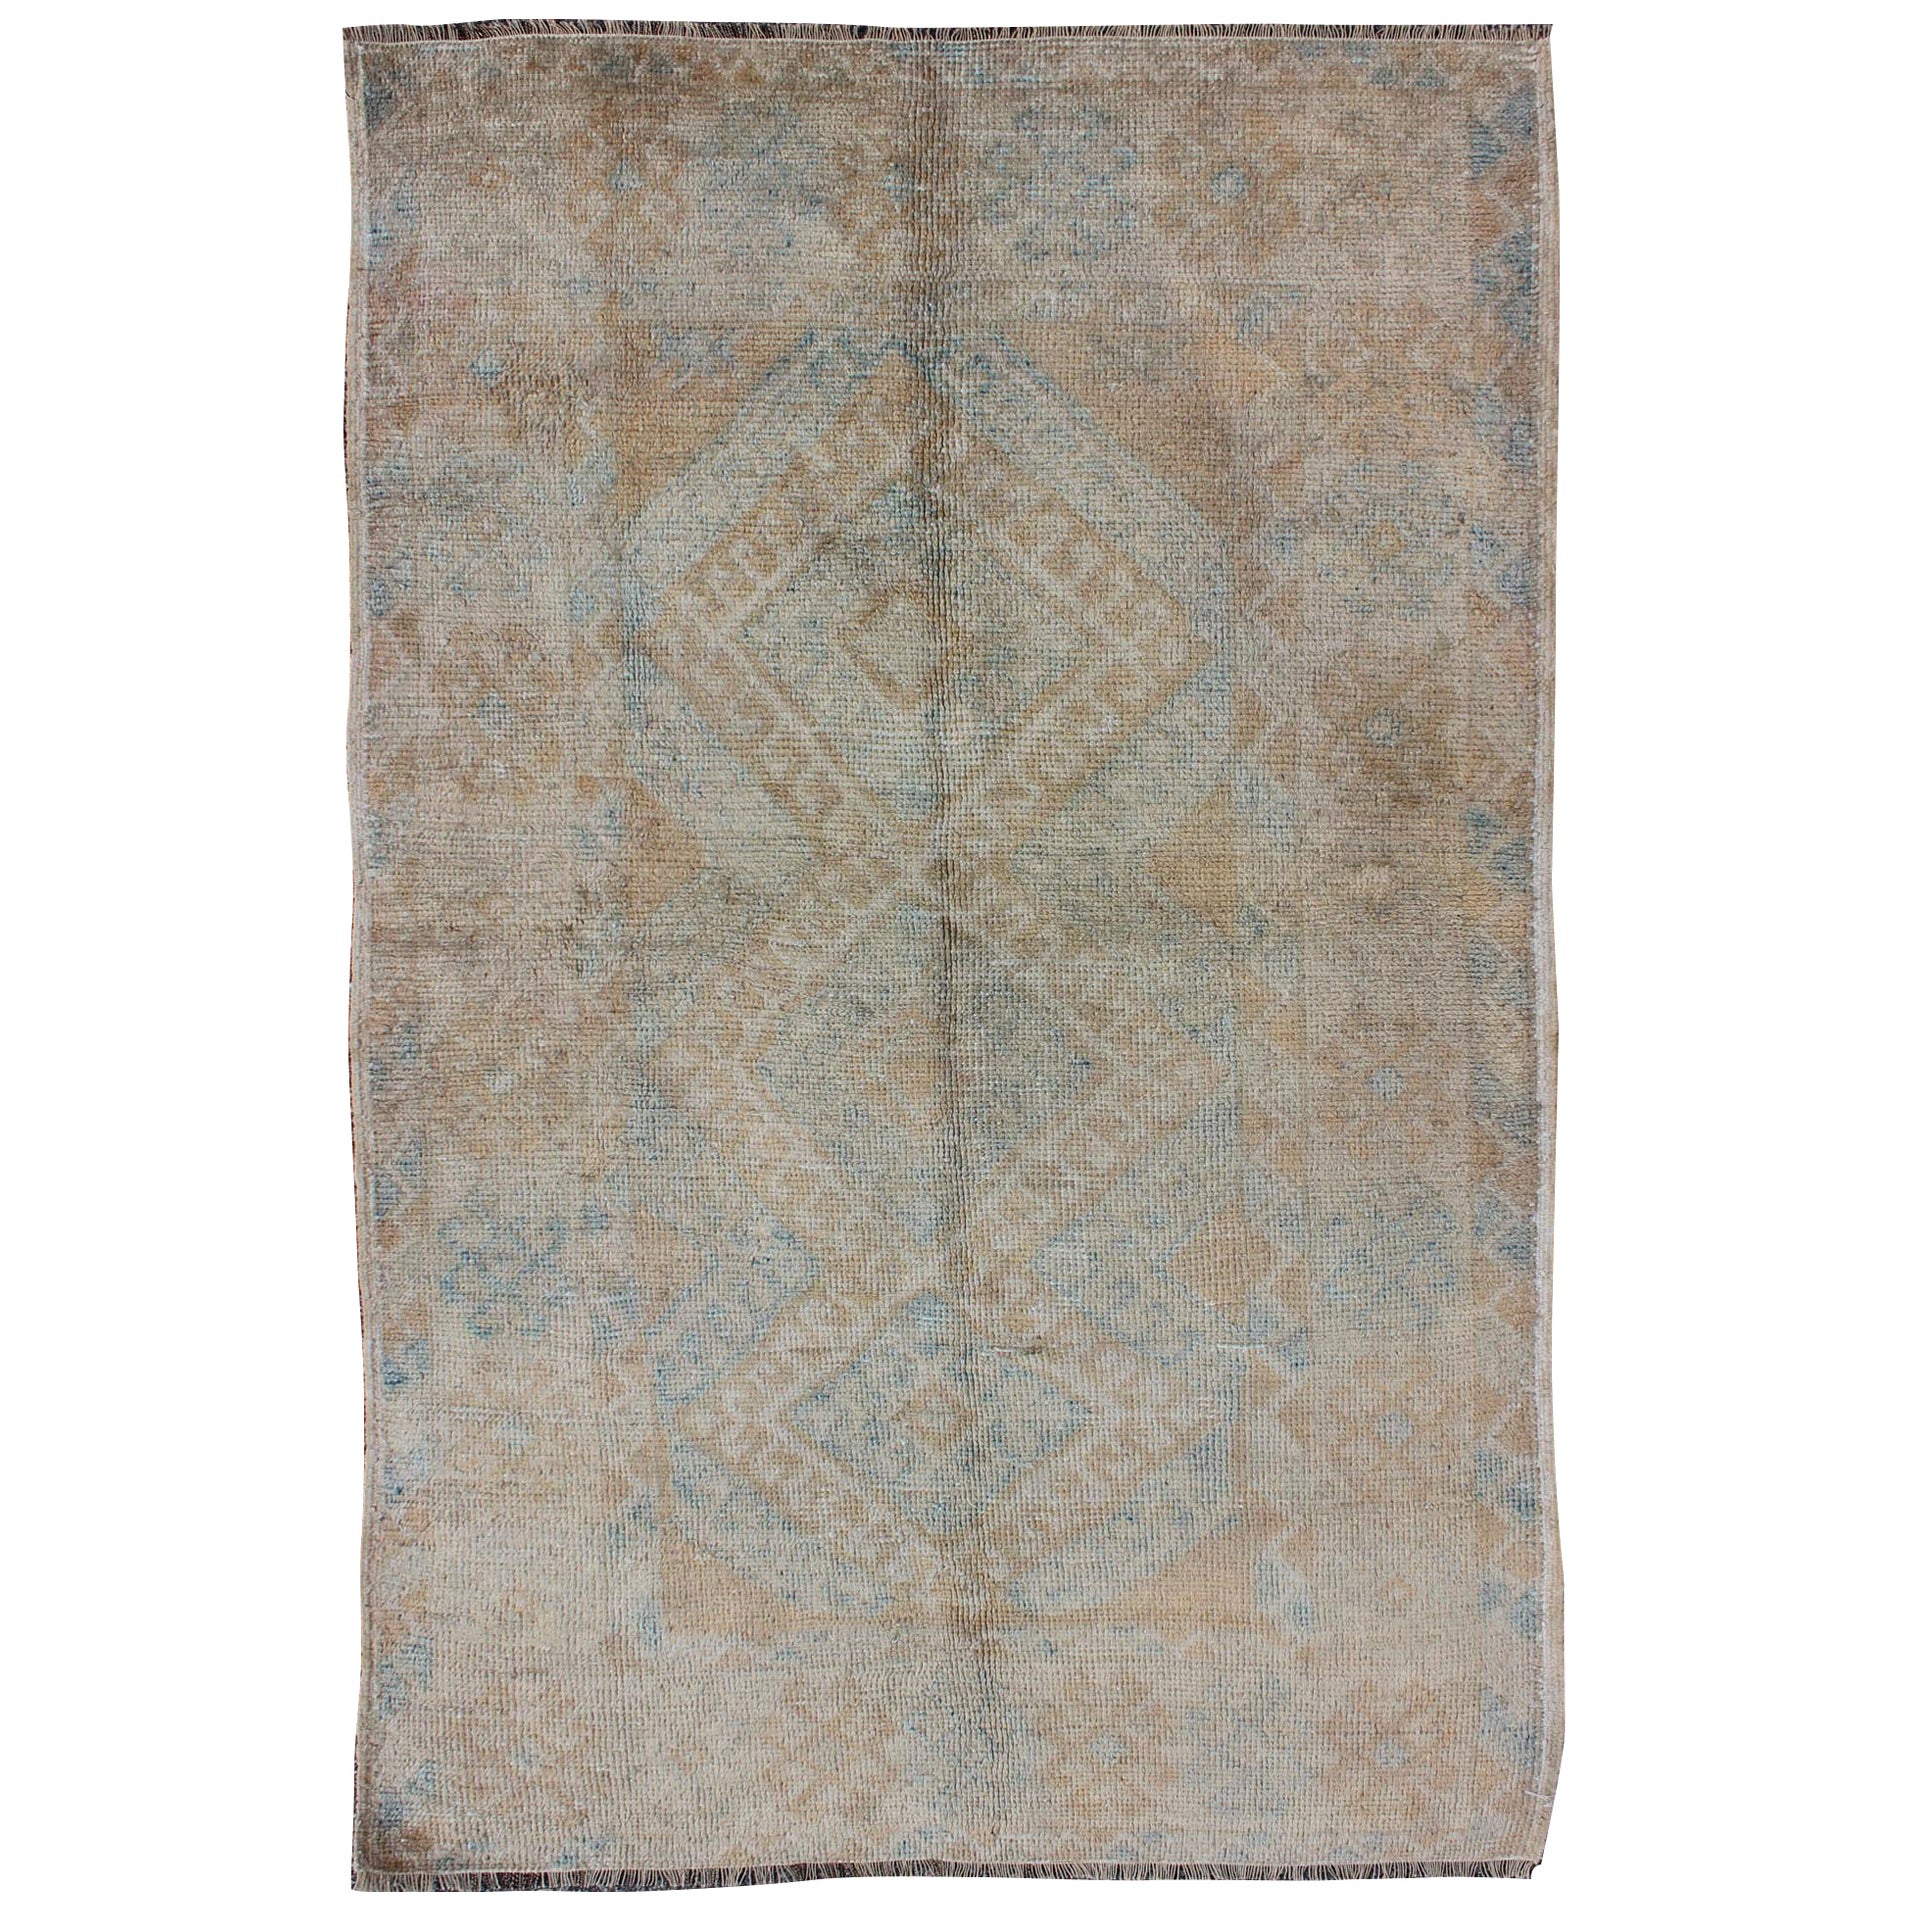 Turkish Oushak Rug with Three Central Medallions in Muted Taupe and Pale Blue